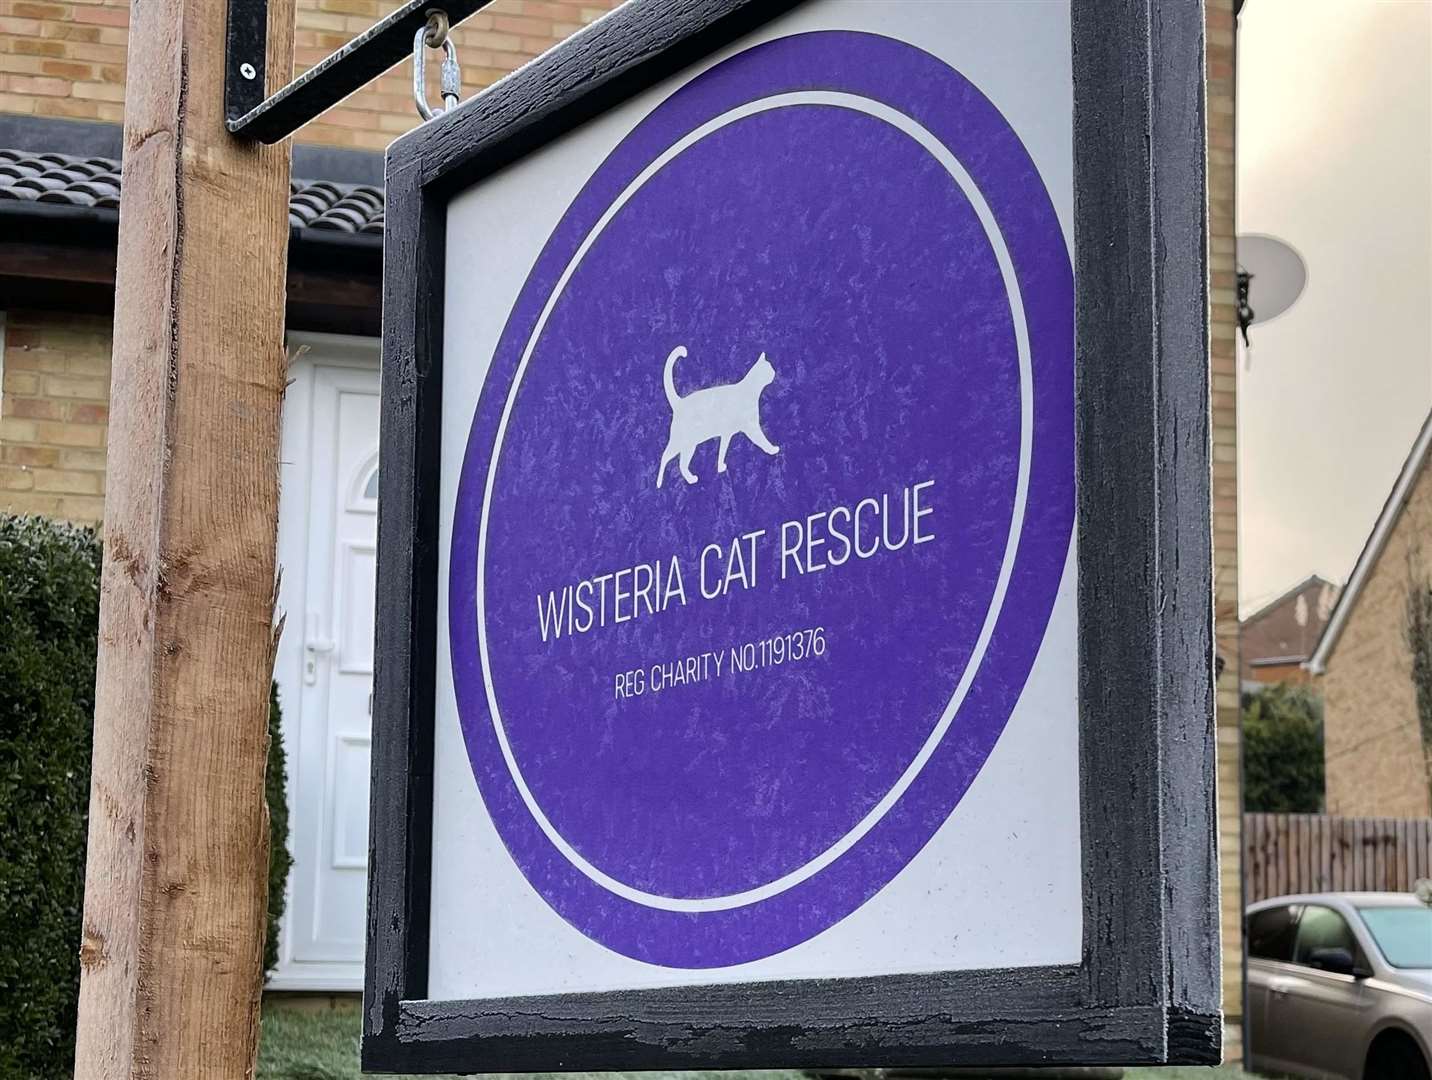 Wisteria Cat Rescue moved from Chatham to Rochester